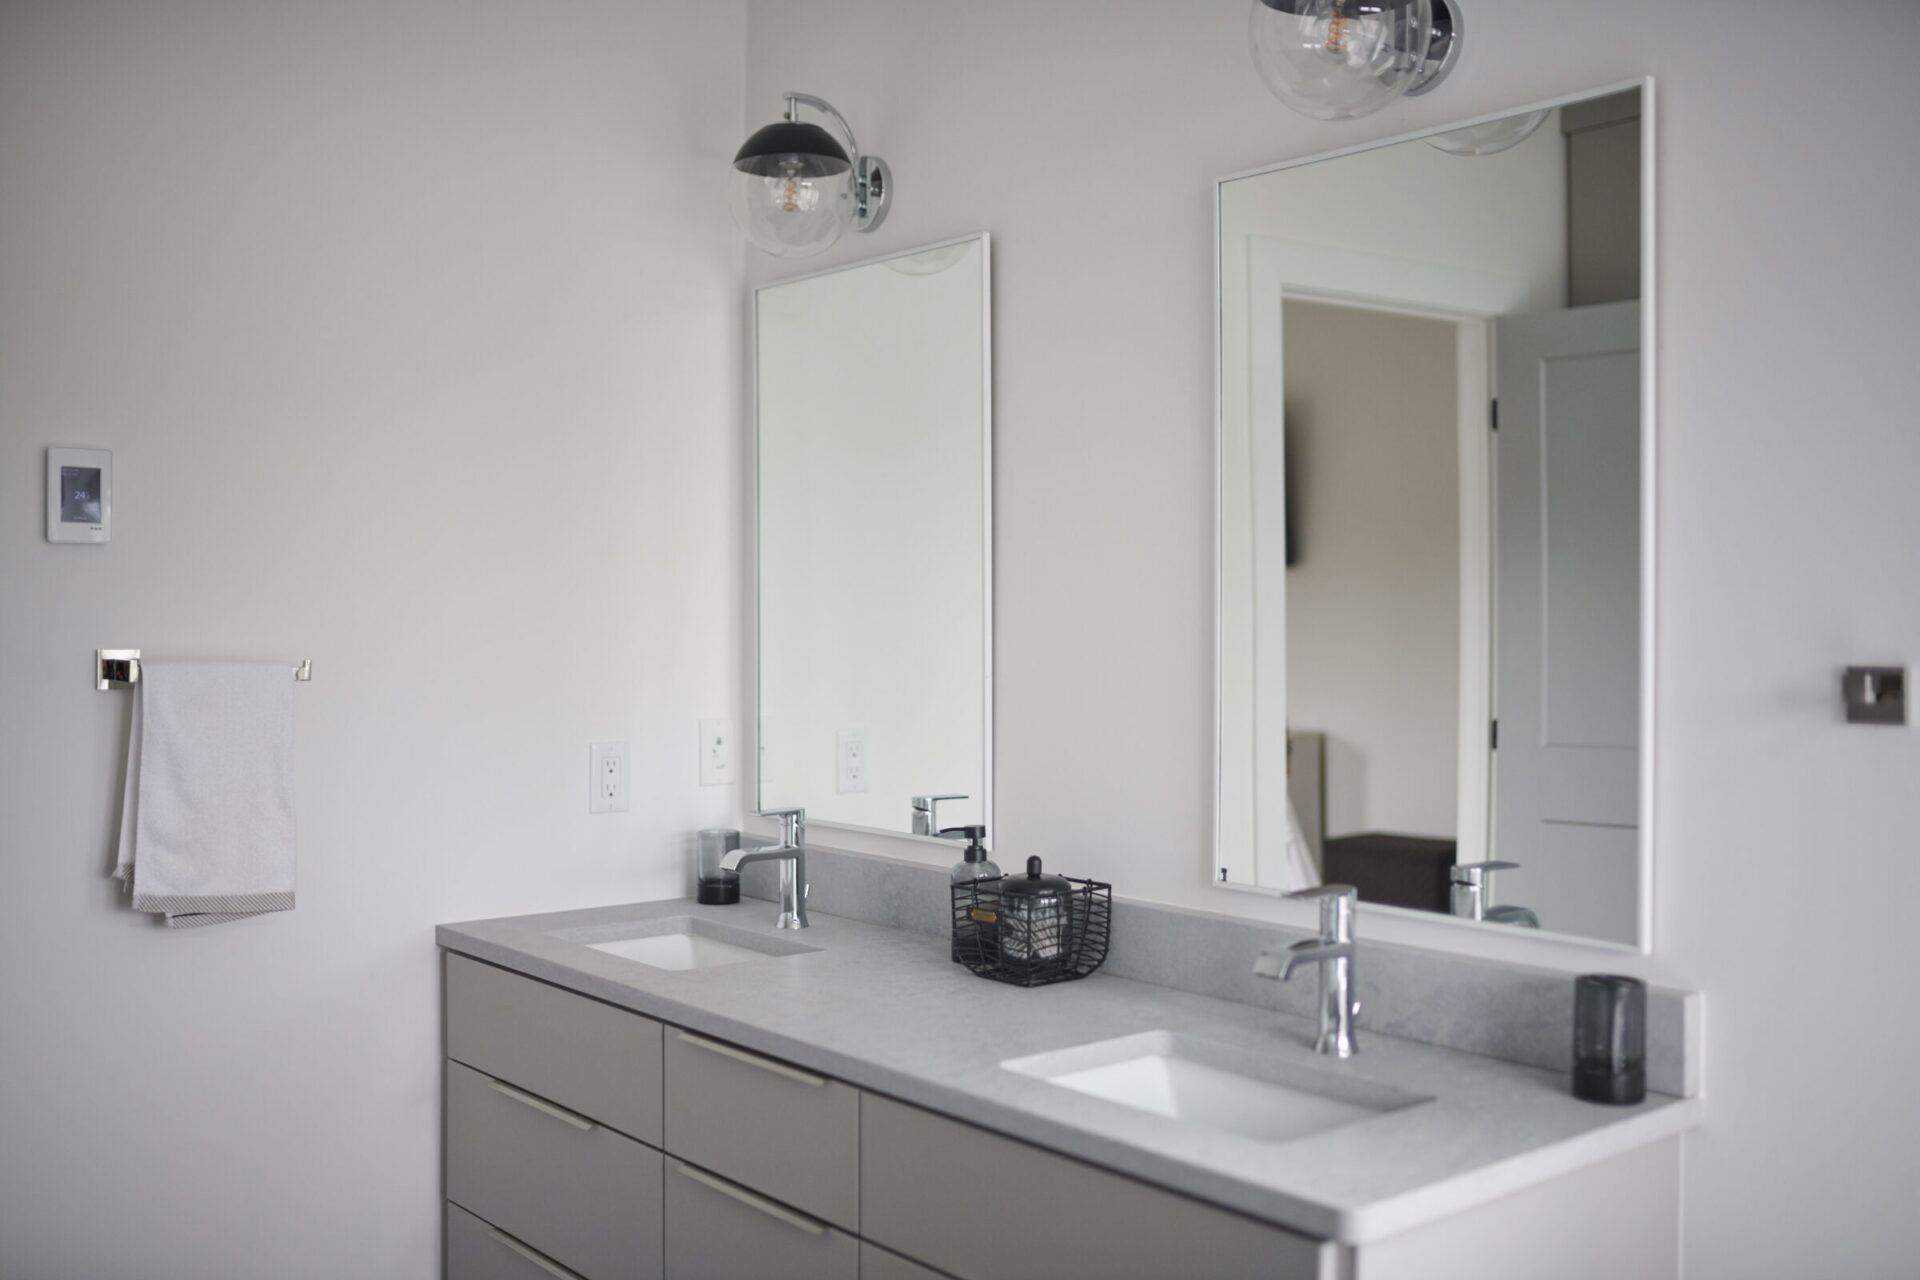 A modern bathroom with a double vanity, two mirrors, globe-style light fixtures, a towel on a rack, and minimalist decor against a neutral palette.